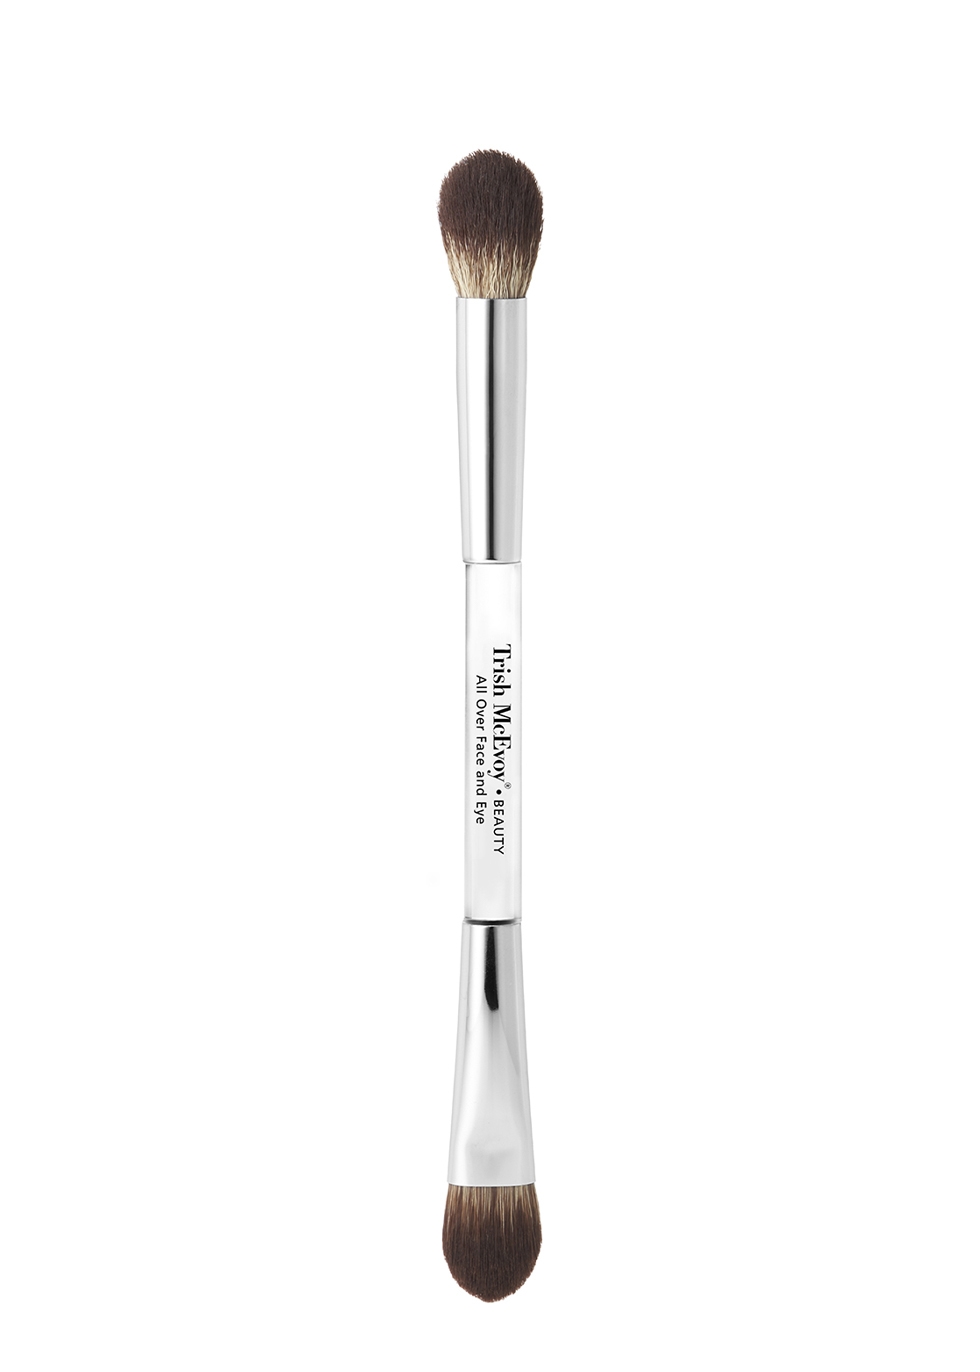 Trish McEvoy All Over Face And Eye Brush